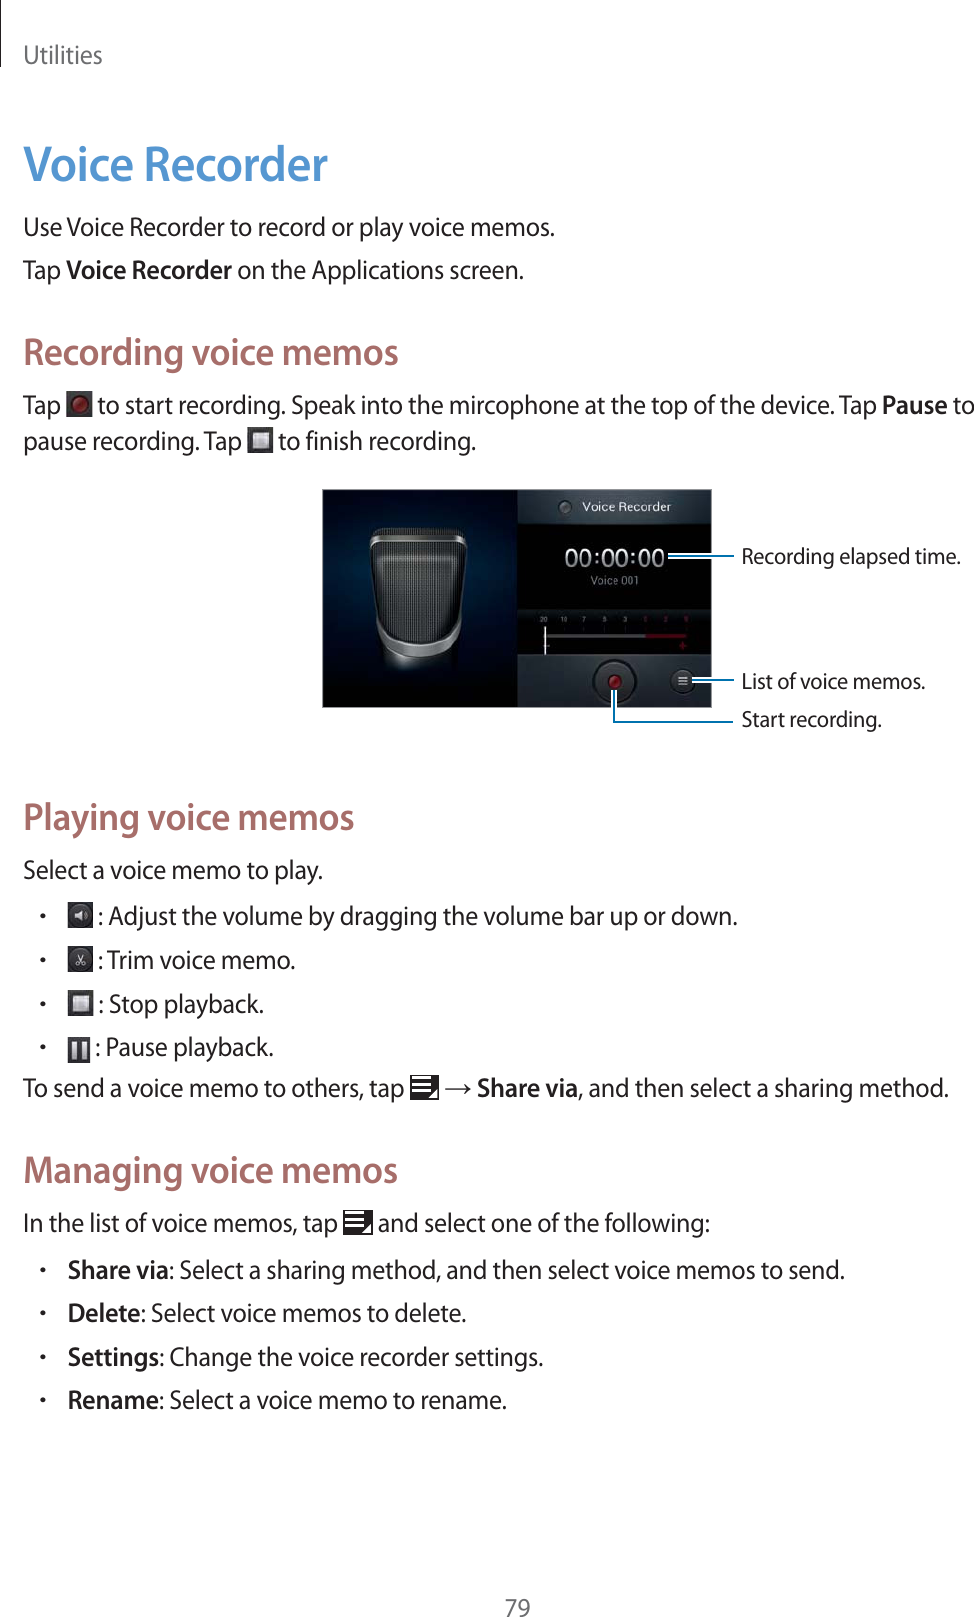 Utilities79Voice RecorderUse Voice Recorder to record or play voice memos.Tap Voice Recorder on the Applications screen.Recording voice memosTap   to start recording. Speak into the mircophone at the top of the device. Tap Pause to pause recording. Tap   to finish recording.Start recording.List of voice memos.Recording elapsed time.Playing voice memosSelect a voice memo to play.r : Adjust the volume by dragging the volume bar up or down.r : Trim voice memo.r : Stop playback.r : Pause playback.To send a voice memo to others, tap   ĺ Share via, and then select a sharing method.Managing voice memosIn the list of voice memos, tap   and select one of the following:rShare via: Select a sharing method, and then select voice memos to send.rDelete: Select voice memos to delete.rSettings: Change the voice recorder settings.rRename: Select a voice memo to rename.